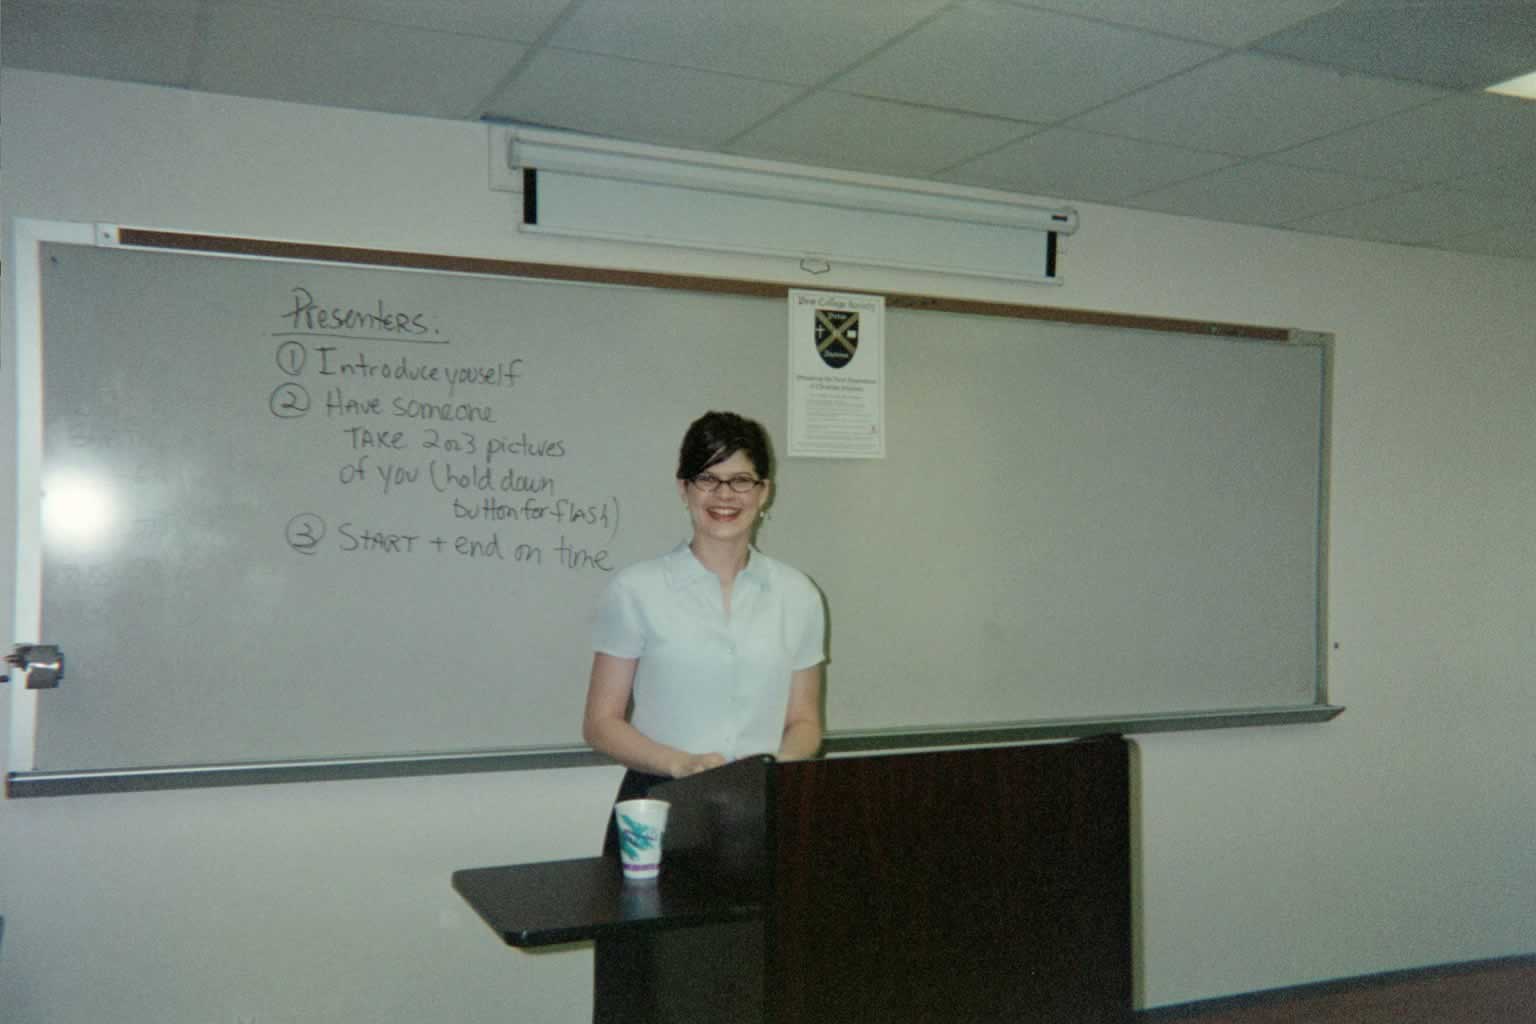 picture of a woman with glasses smiling behind a podium in a classroom